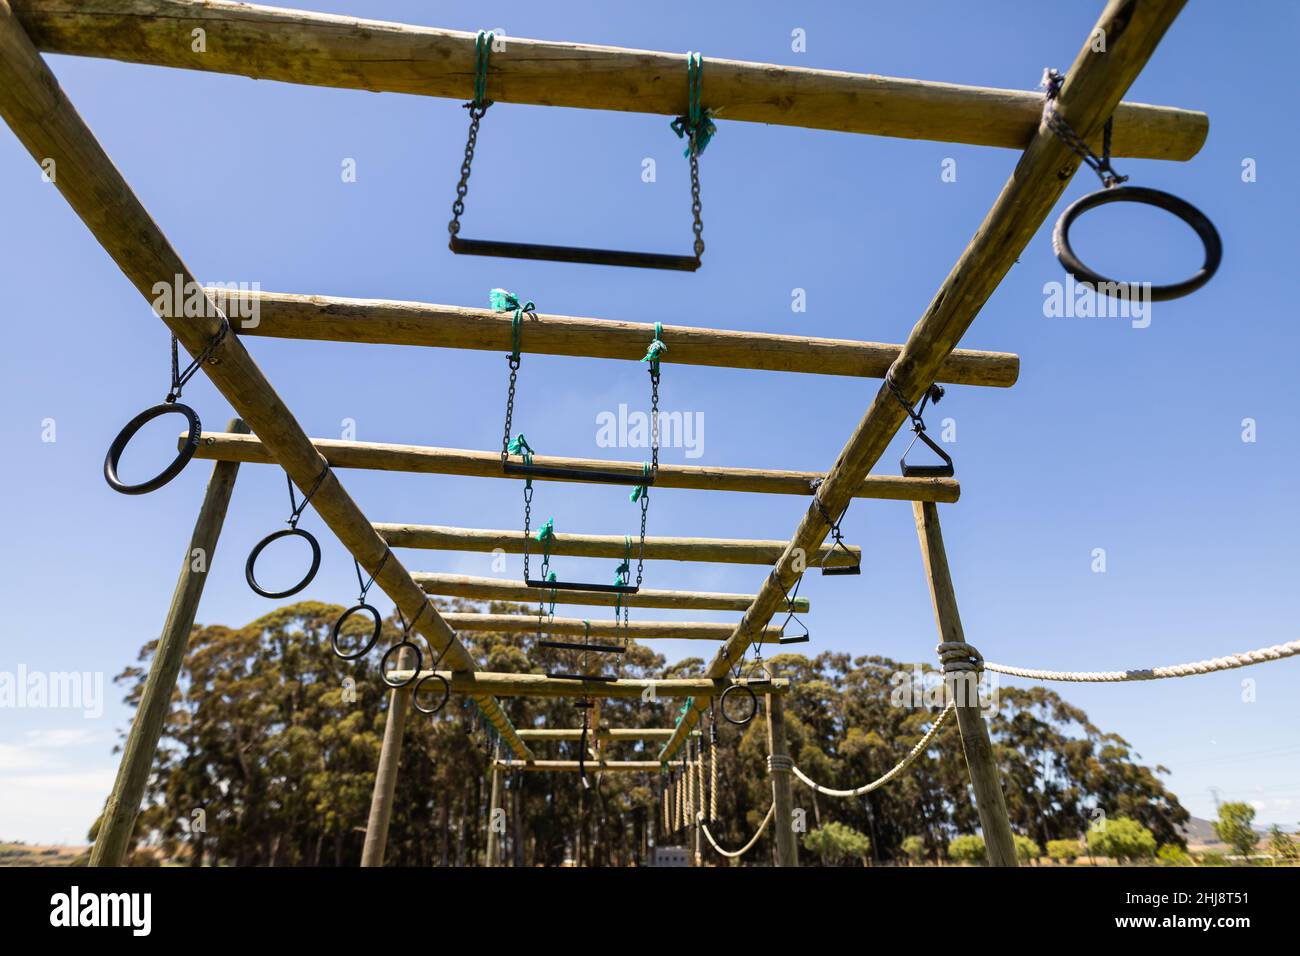 View of monkey bar obstacle course at a boot camp Stock Photo